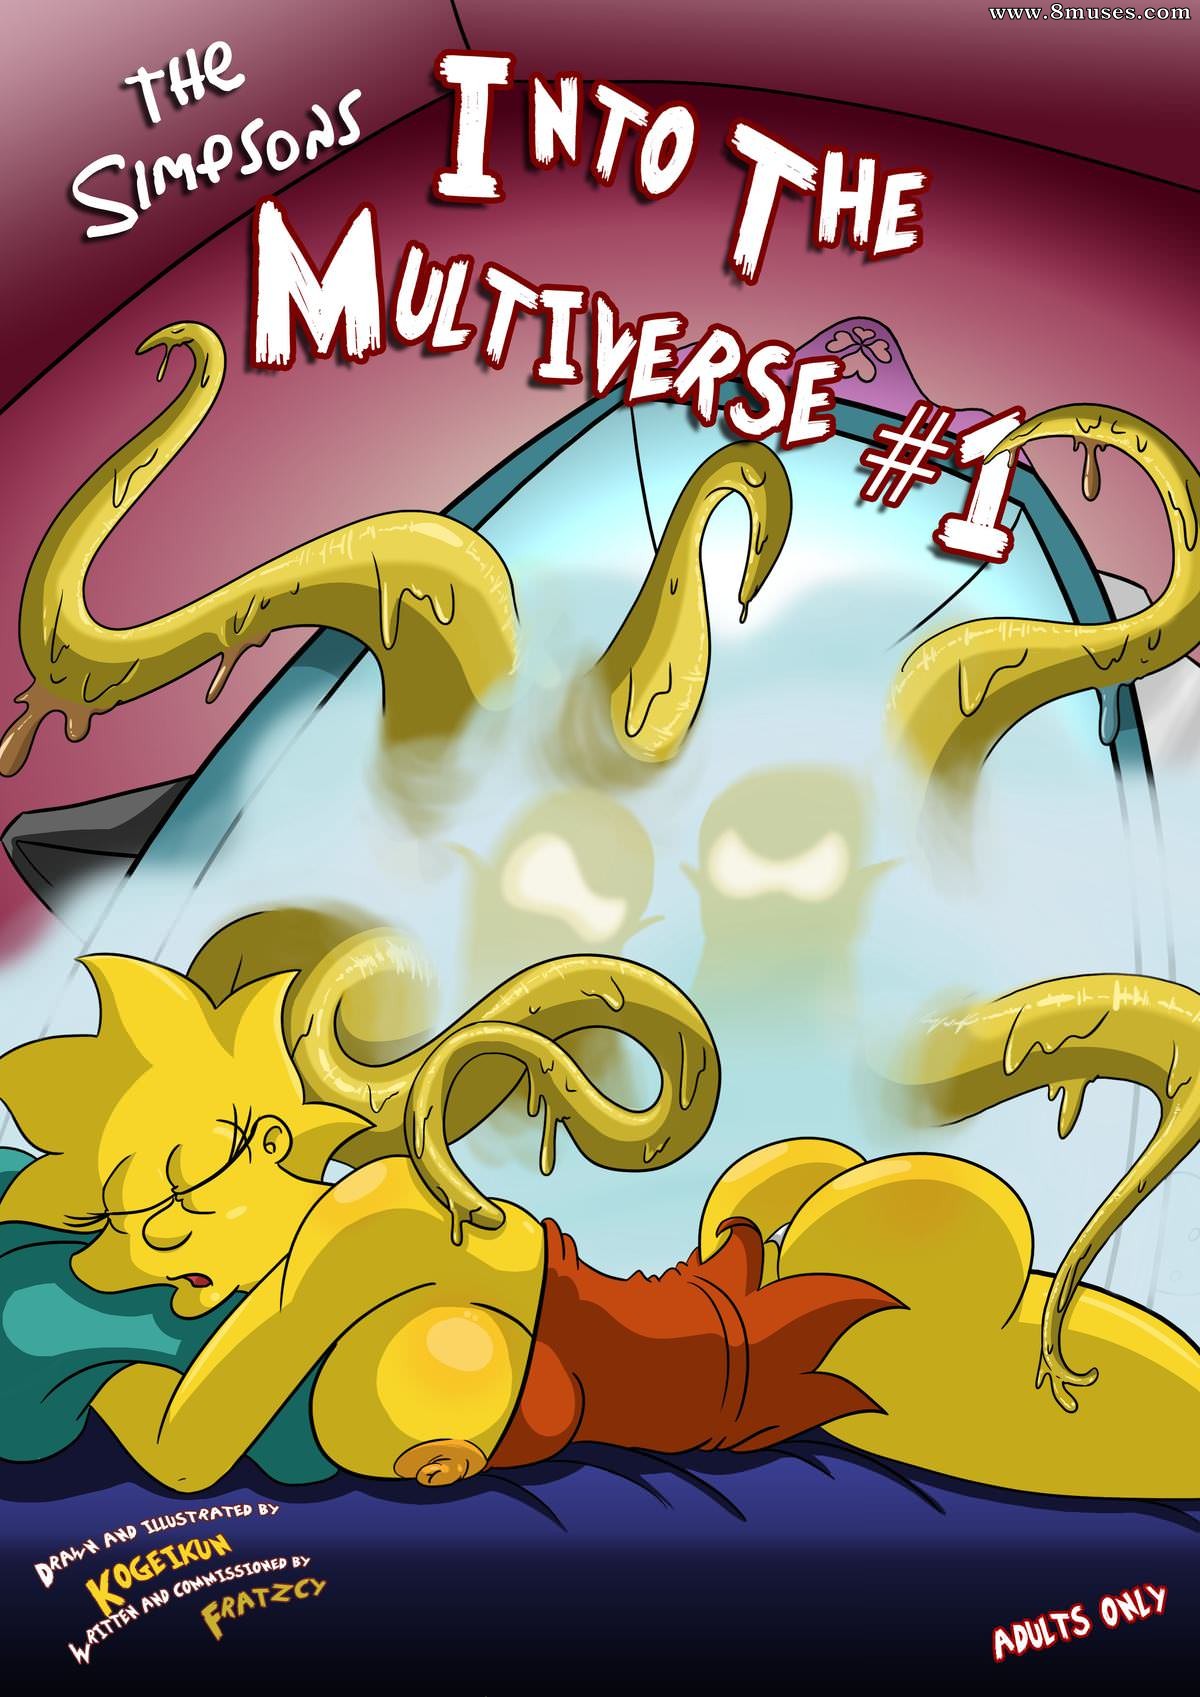 The Simpsons Into the Multiverse - 8muses Comics - Sex Comics and Porn  Cartoons